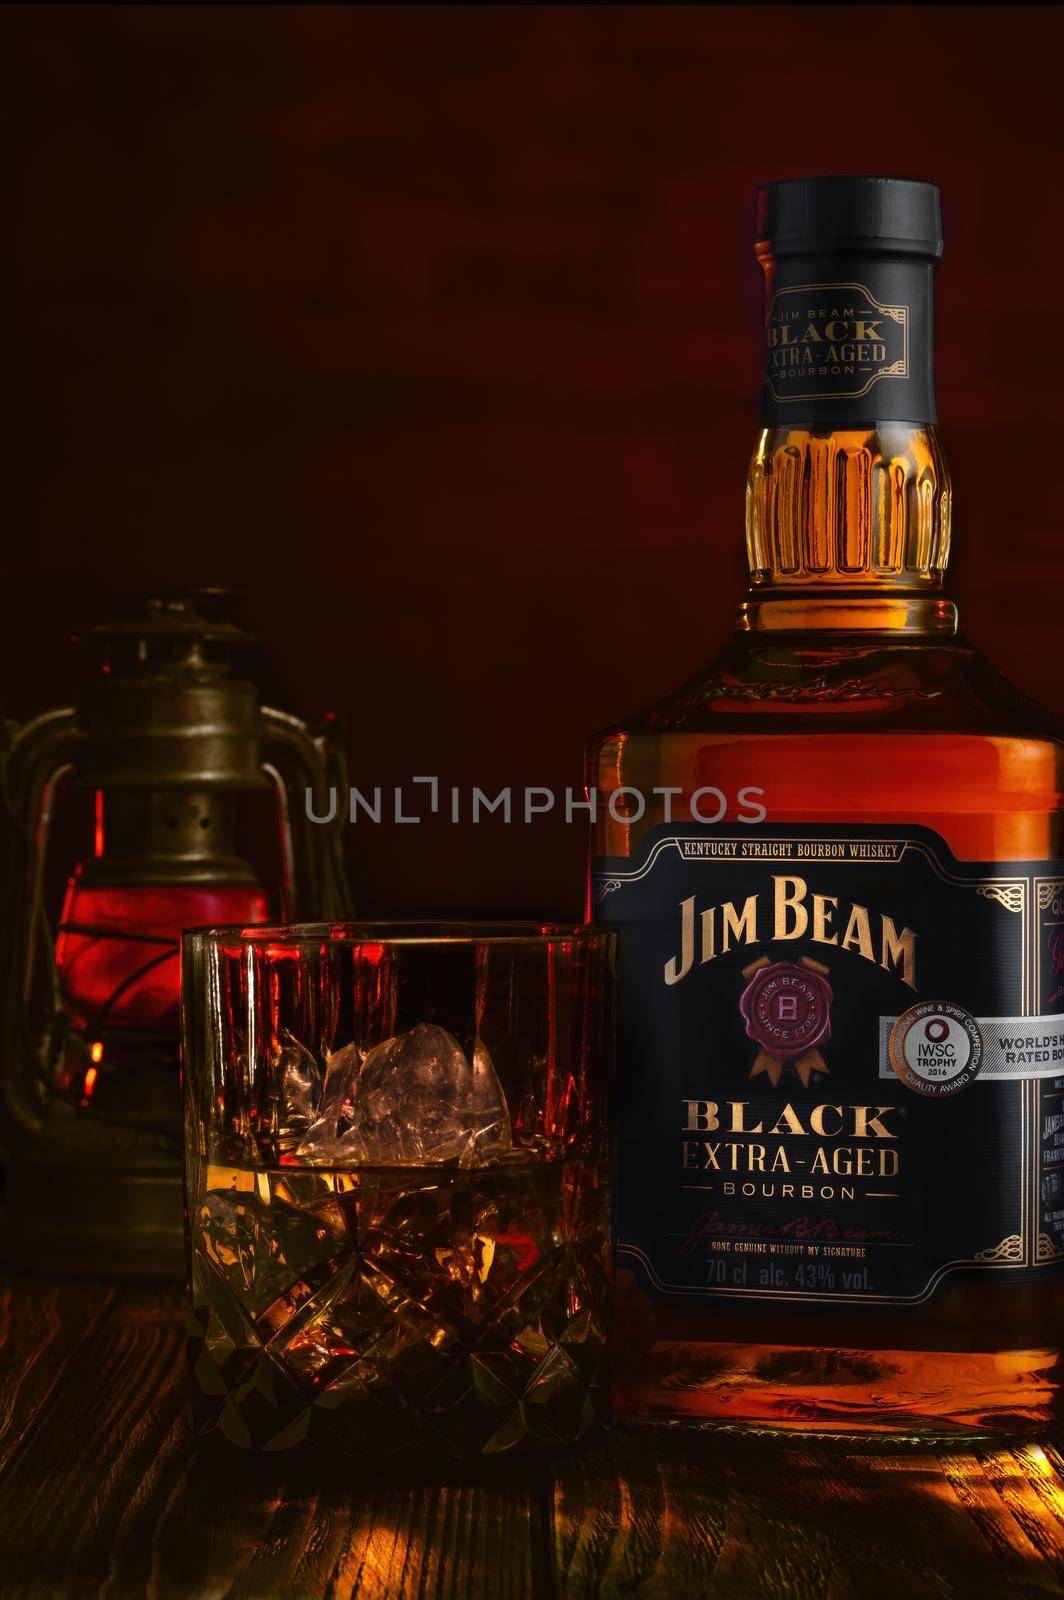 Bottle of Jim Beam Black Extra Aged Bourbon whiskey and glass with drink and ice on Red background. by Fischeron